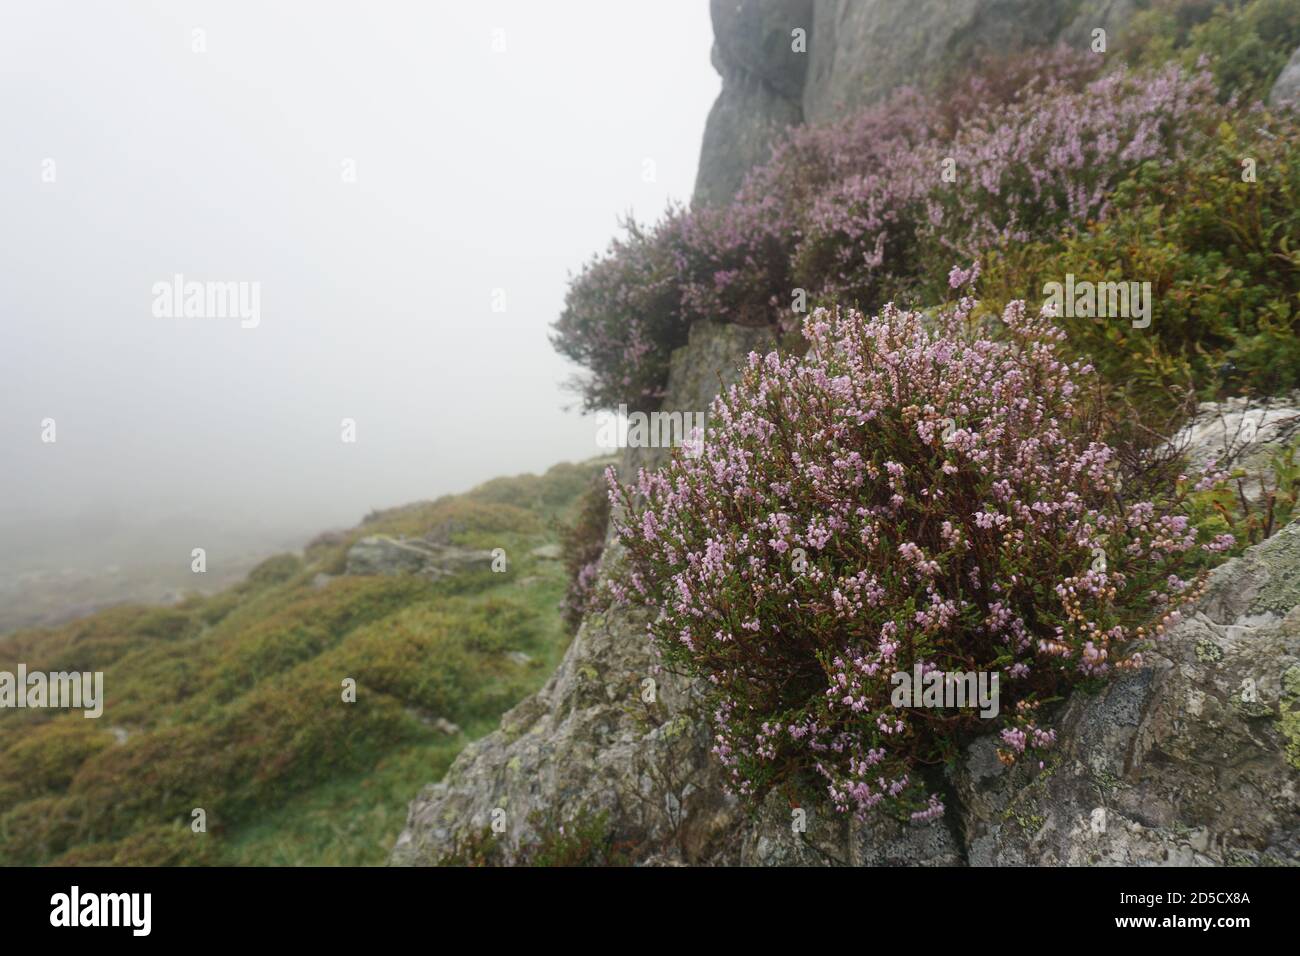 Heather in the mist on a rock face Stock Photo